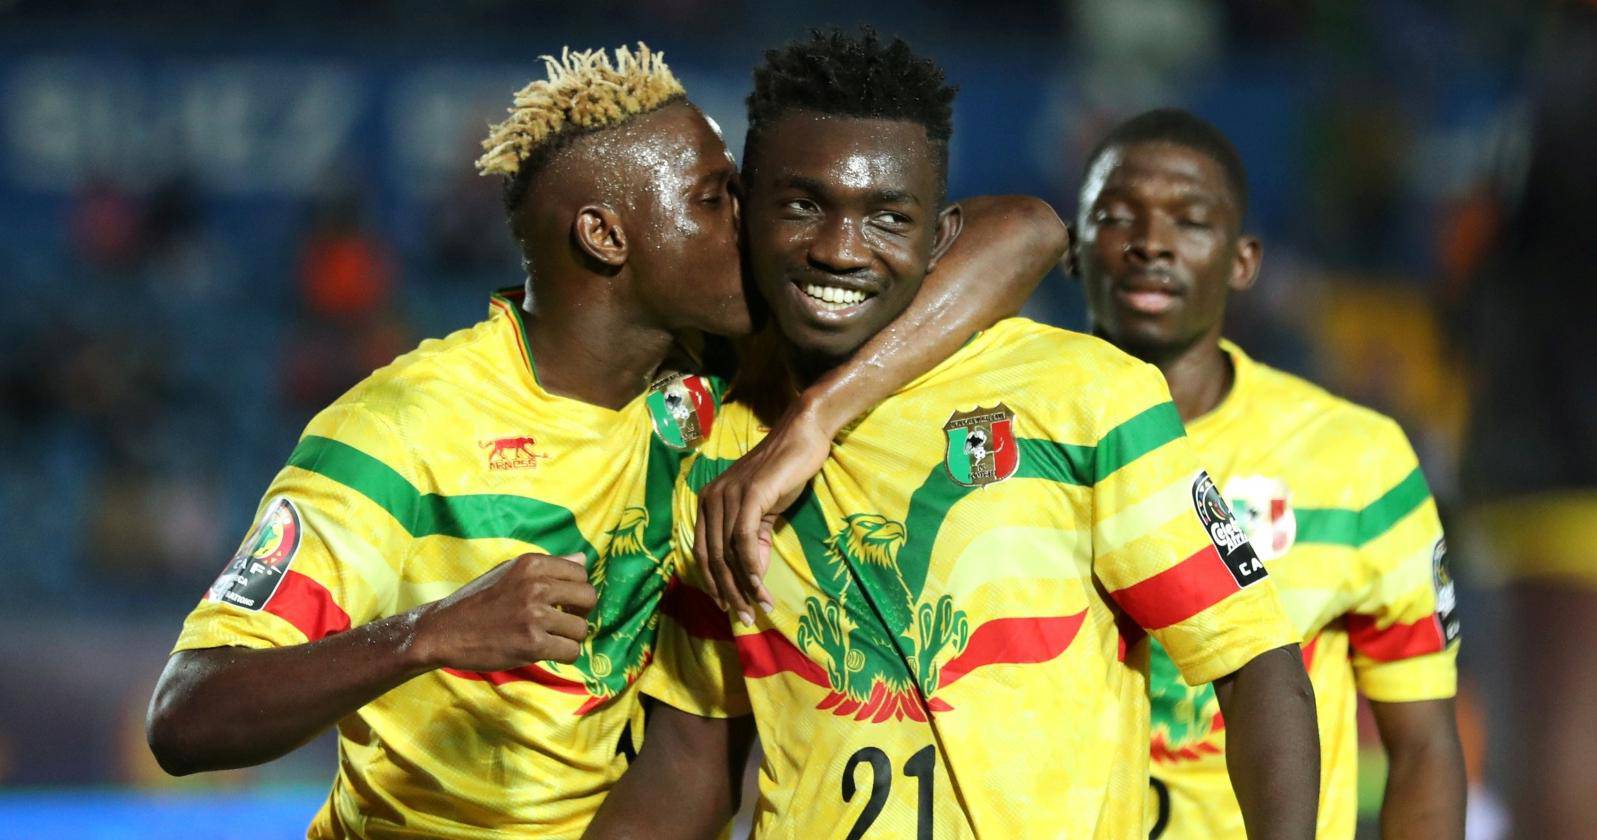 Africa Cup of Nations 2019 - Group E - Mali v Mauritania